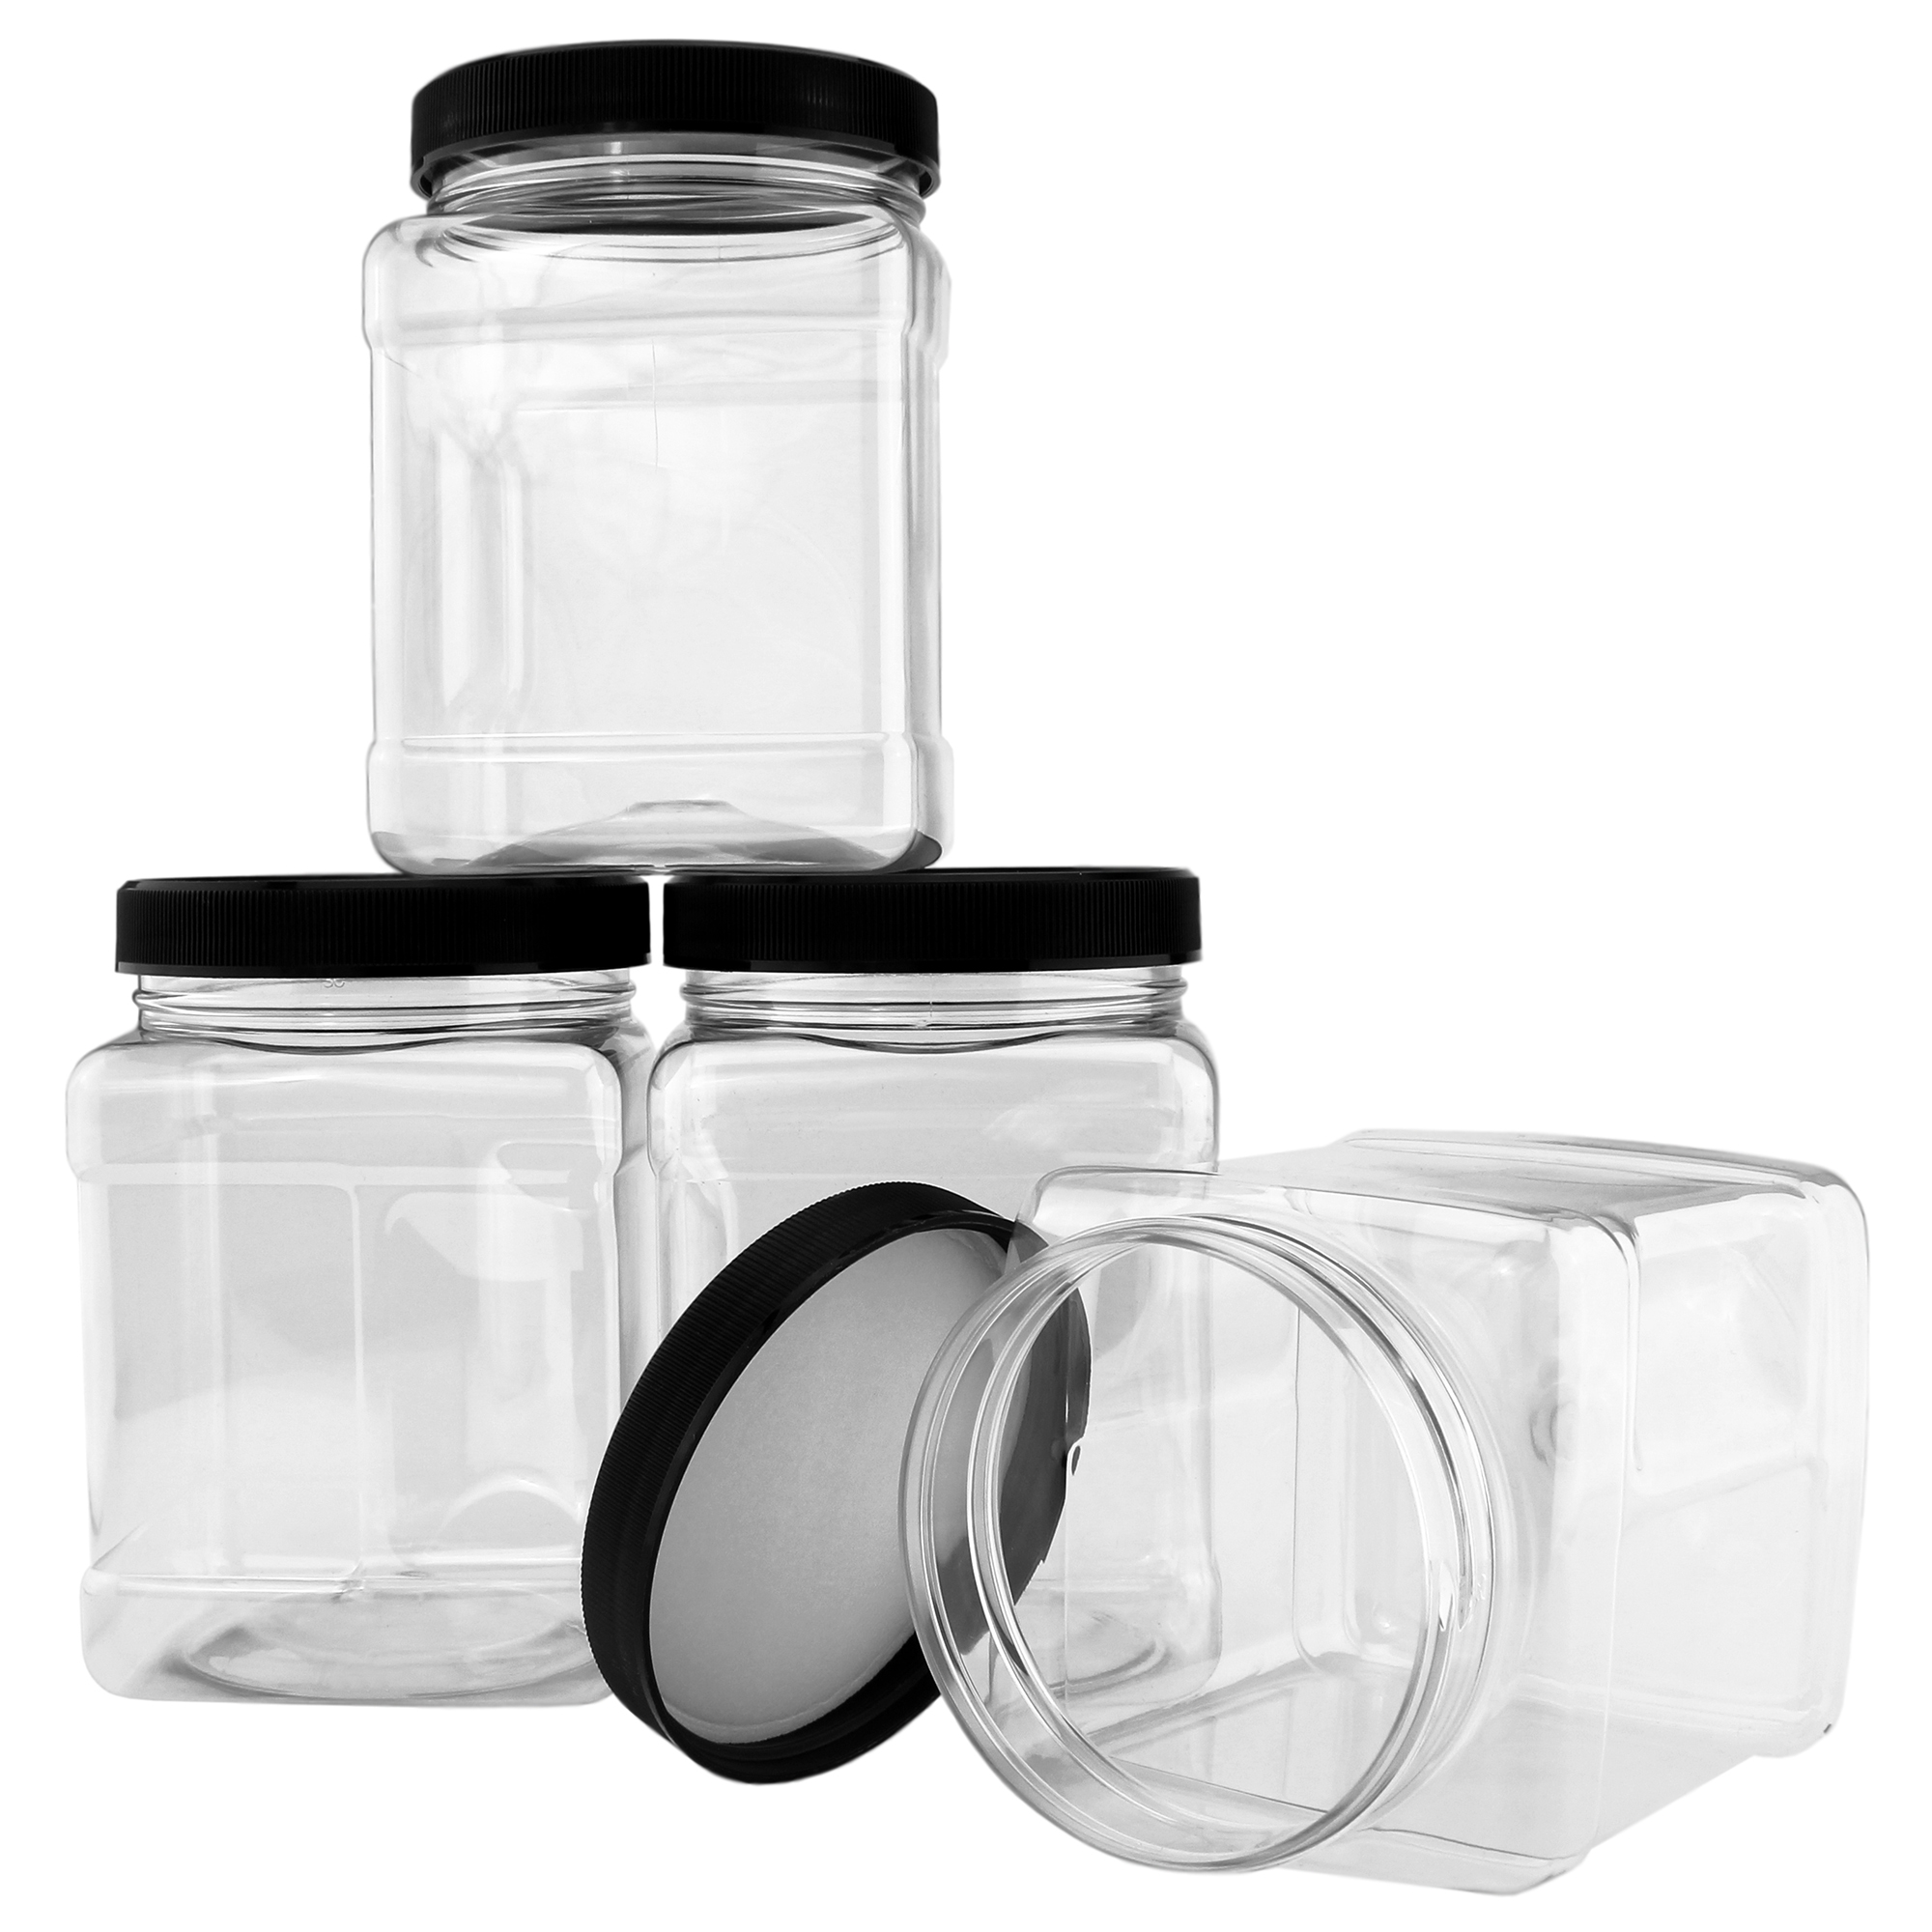 32oz Square Plastic Jars (4-Pack, Quart); Clear Rectangular 4-Cup Canisters w/Black Lids, Easy-Grip Side - image 5 of 6